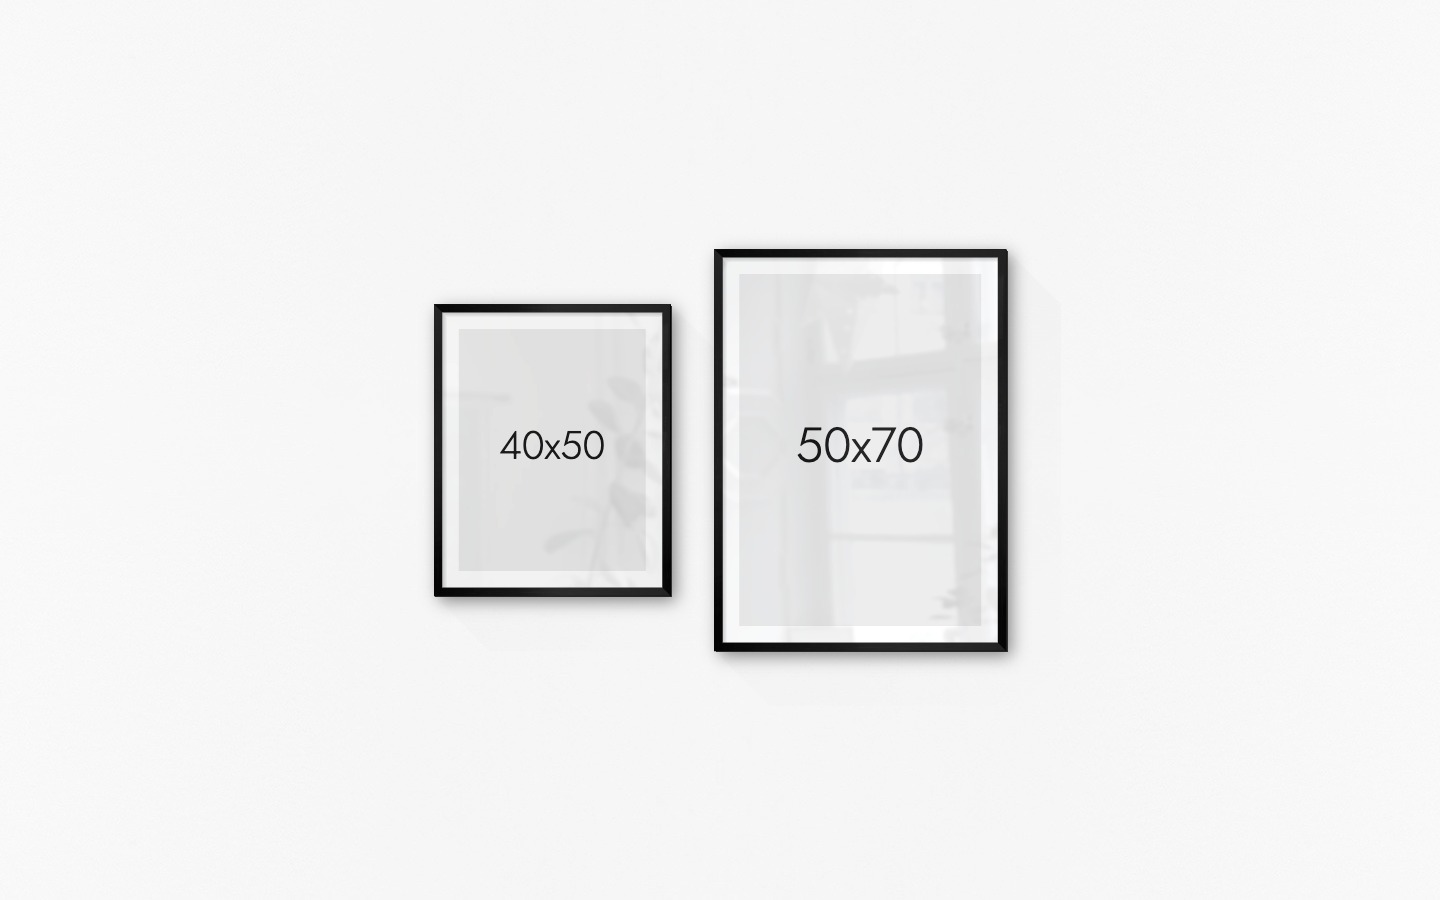 Gallery wall with picture frames in black in sizes 40x50 and 50x70